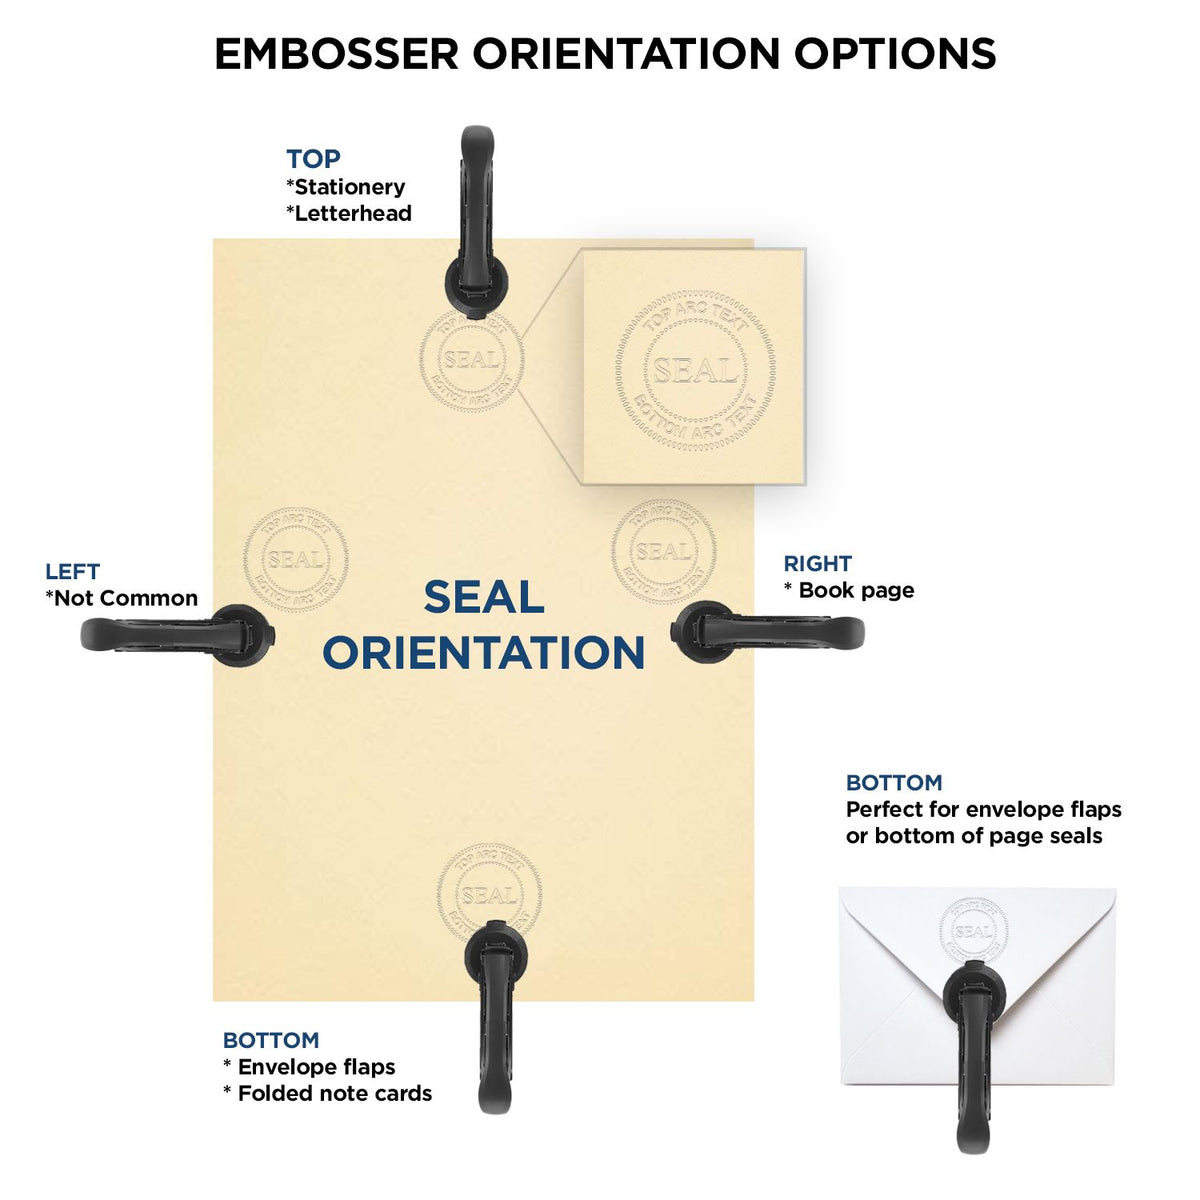 An infographic for the Handheld New Jersey Professional Engineer Embosser showing embosser orientation, this is showing examples of a top, bottom, right and left insert.